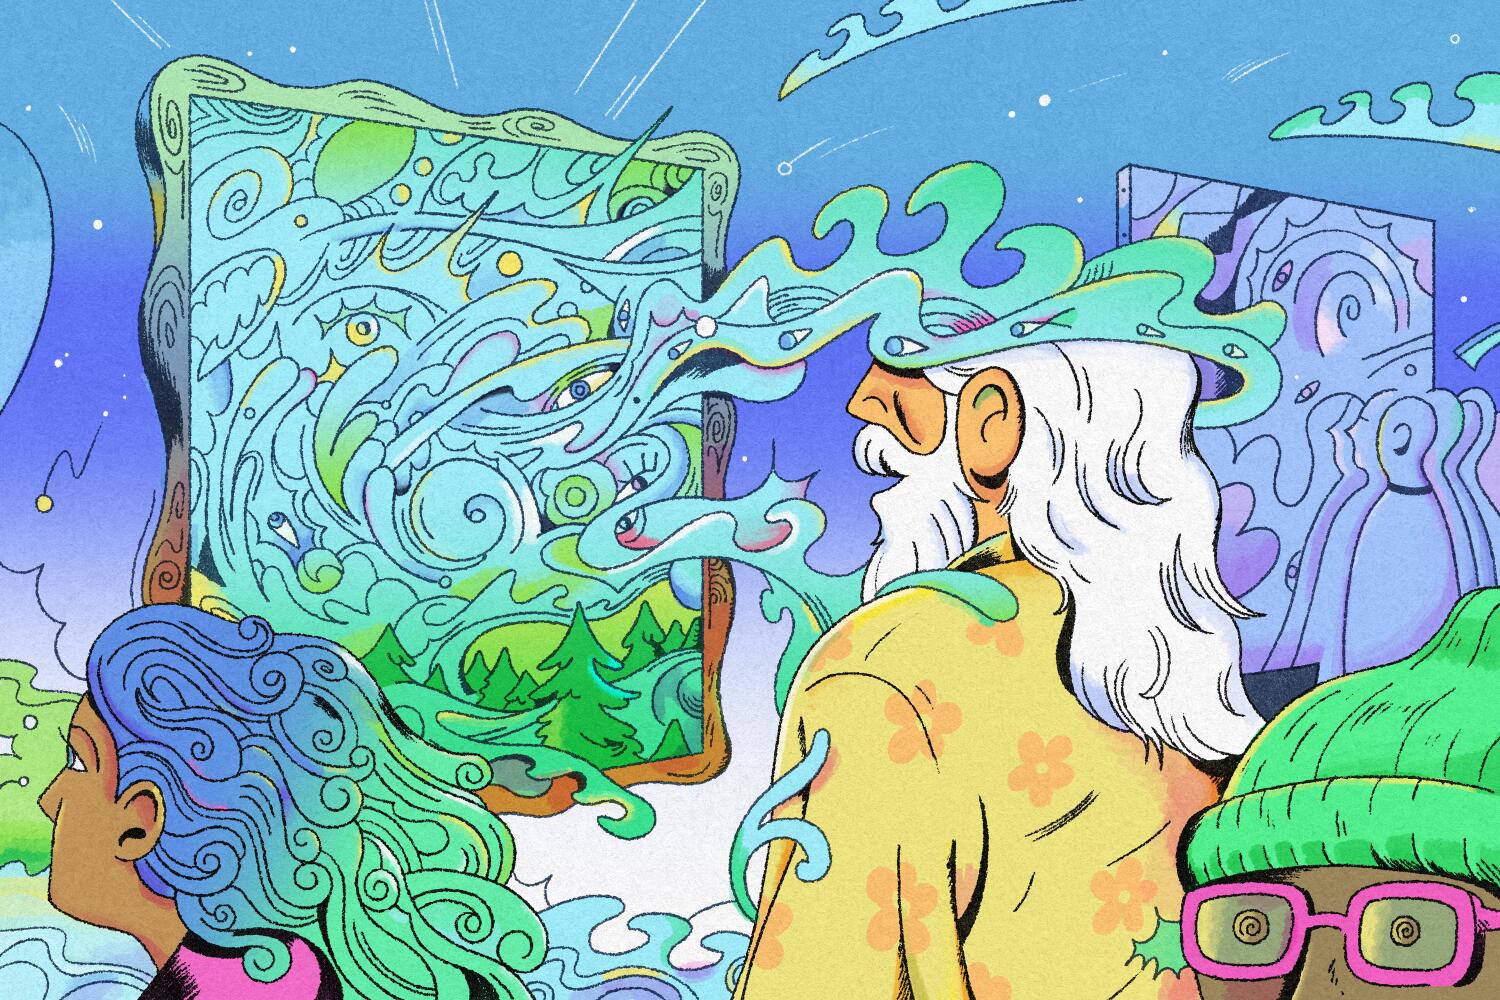 Weed changed this California town. Now artsy residents are all in on psychedelics